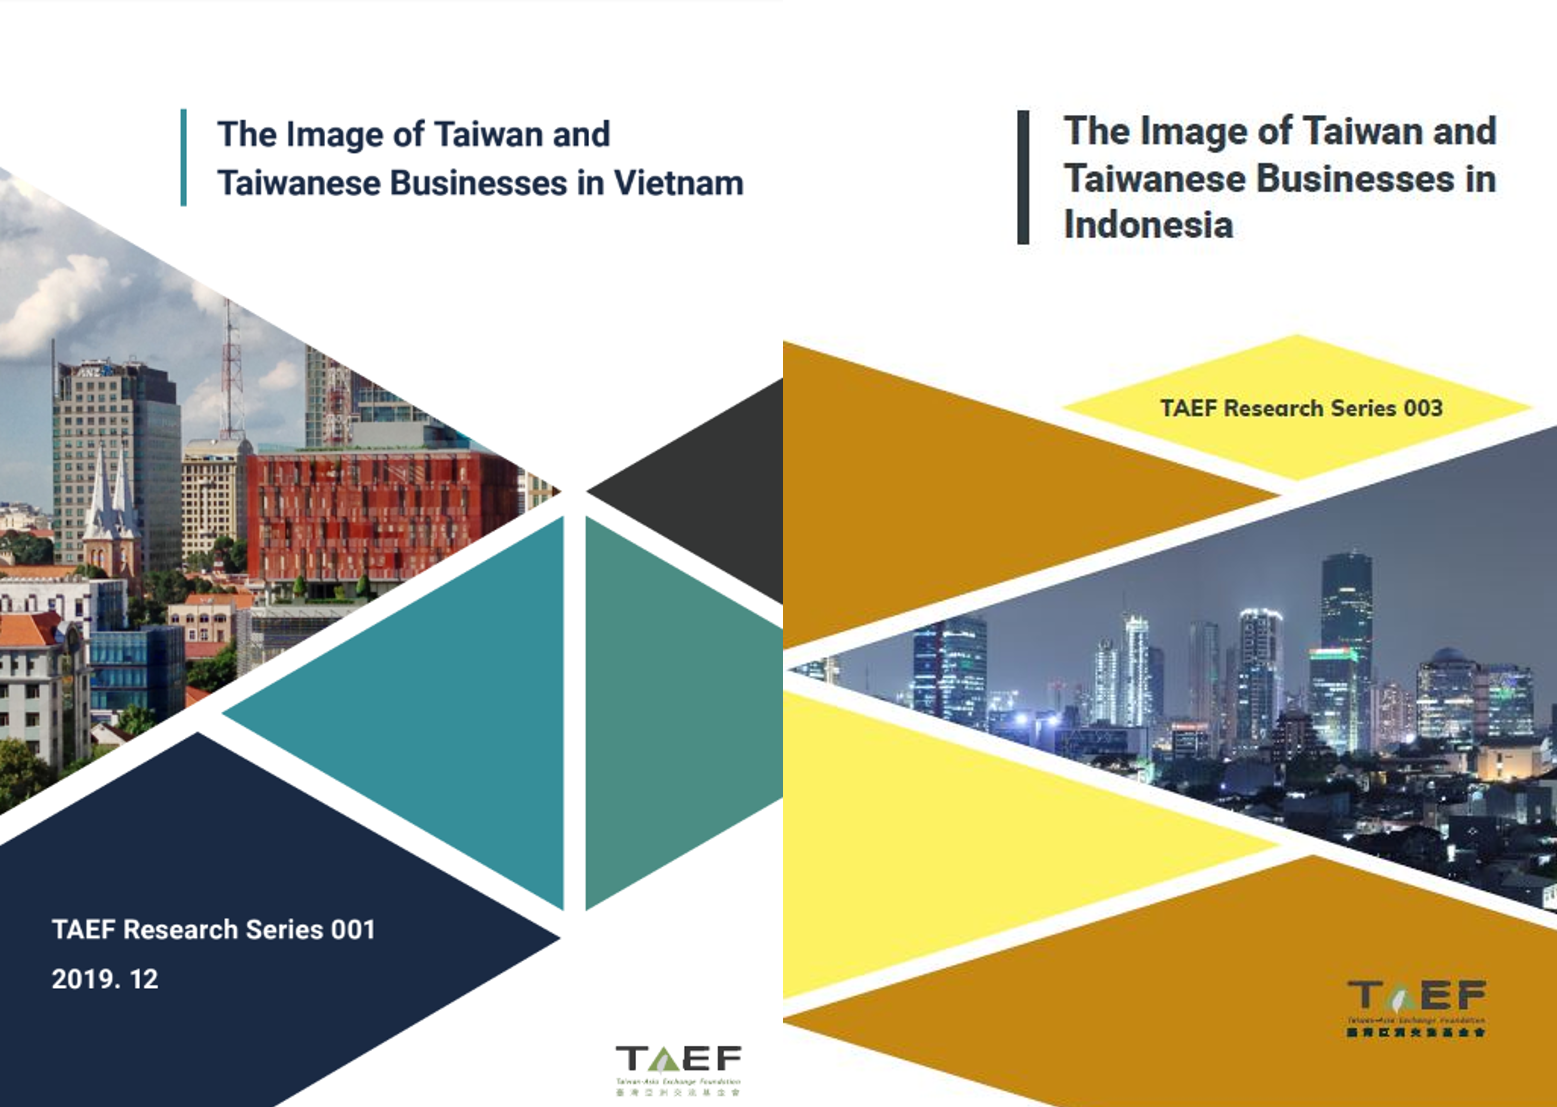 Book Press Release: The Image of Taiwan and Taiwanese Businesses in Thailand